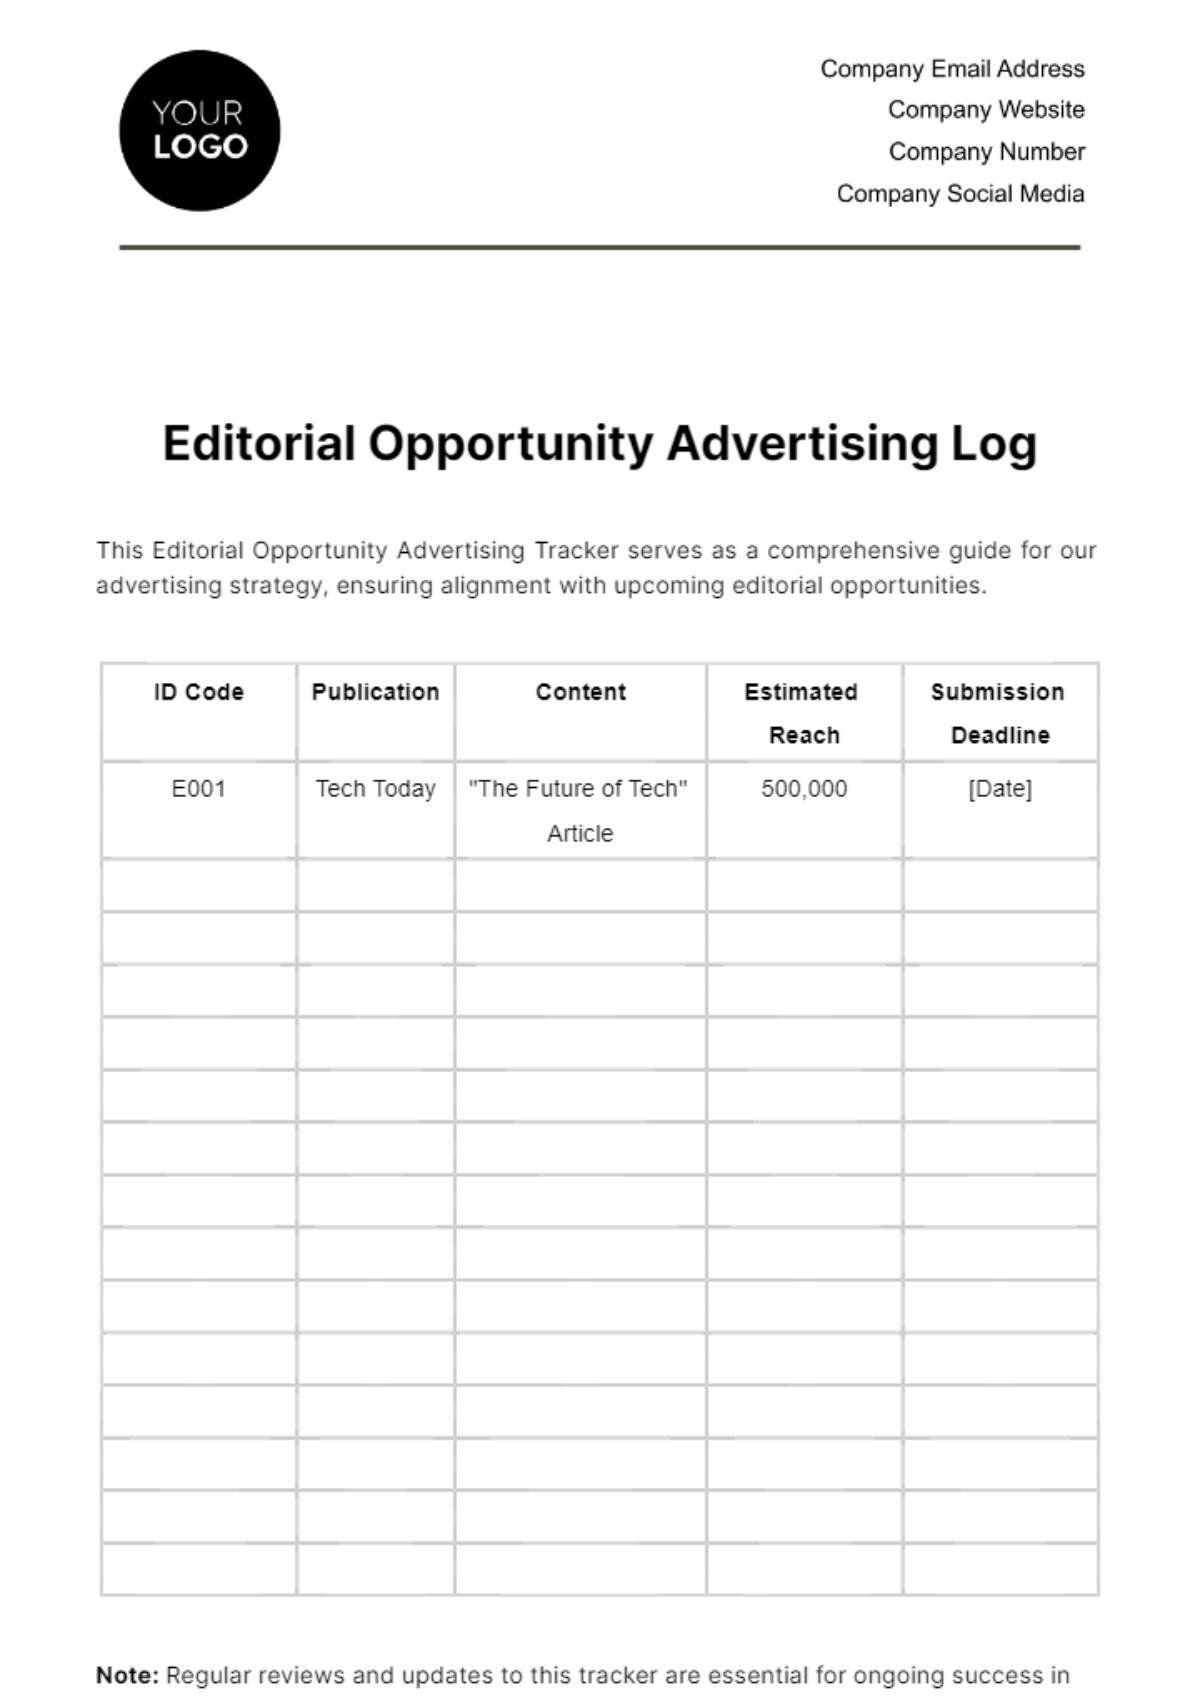 Free Editorial Opportunity Advertising Log Template